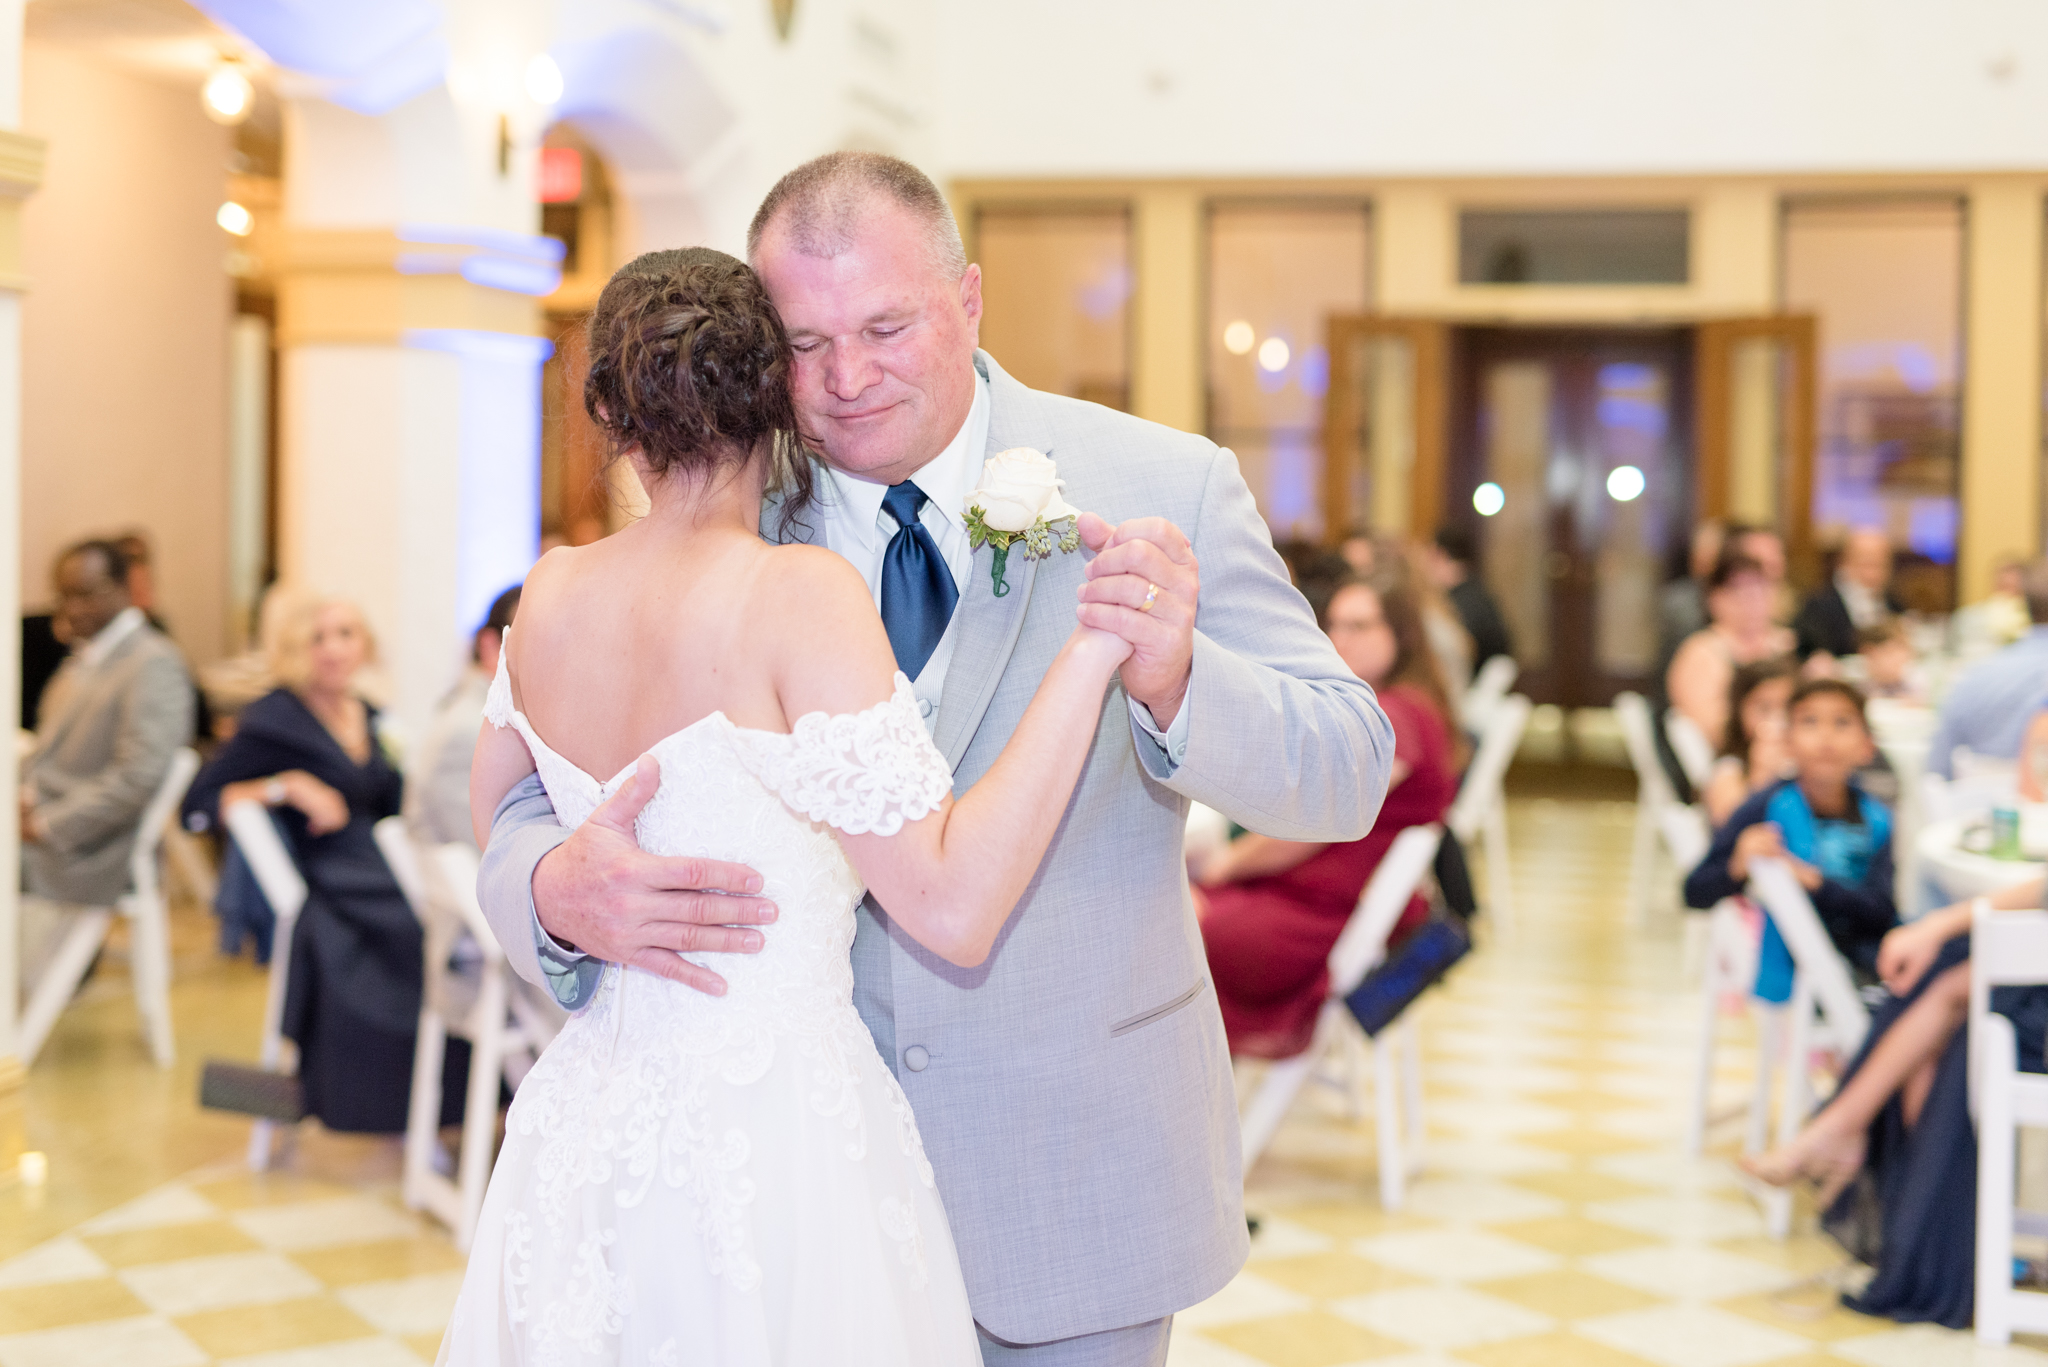 Bride and her dad dance during reception.